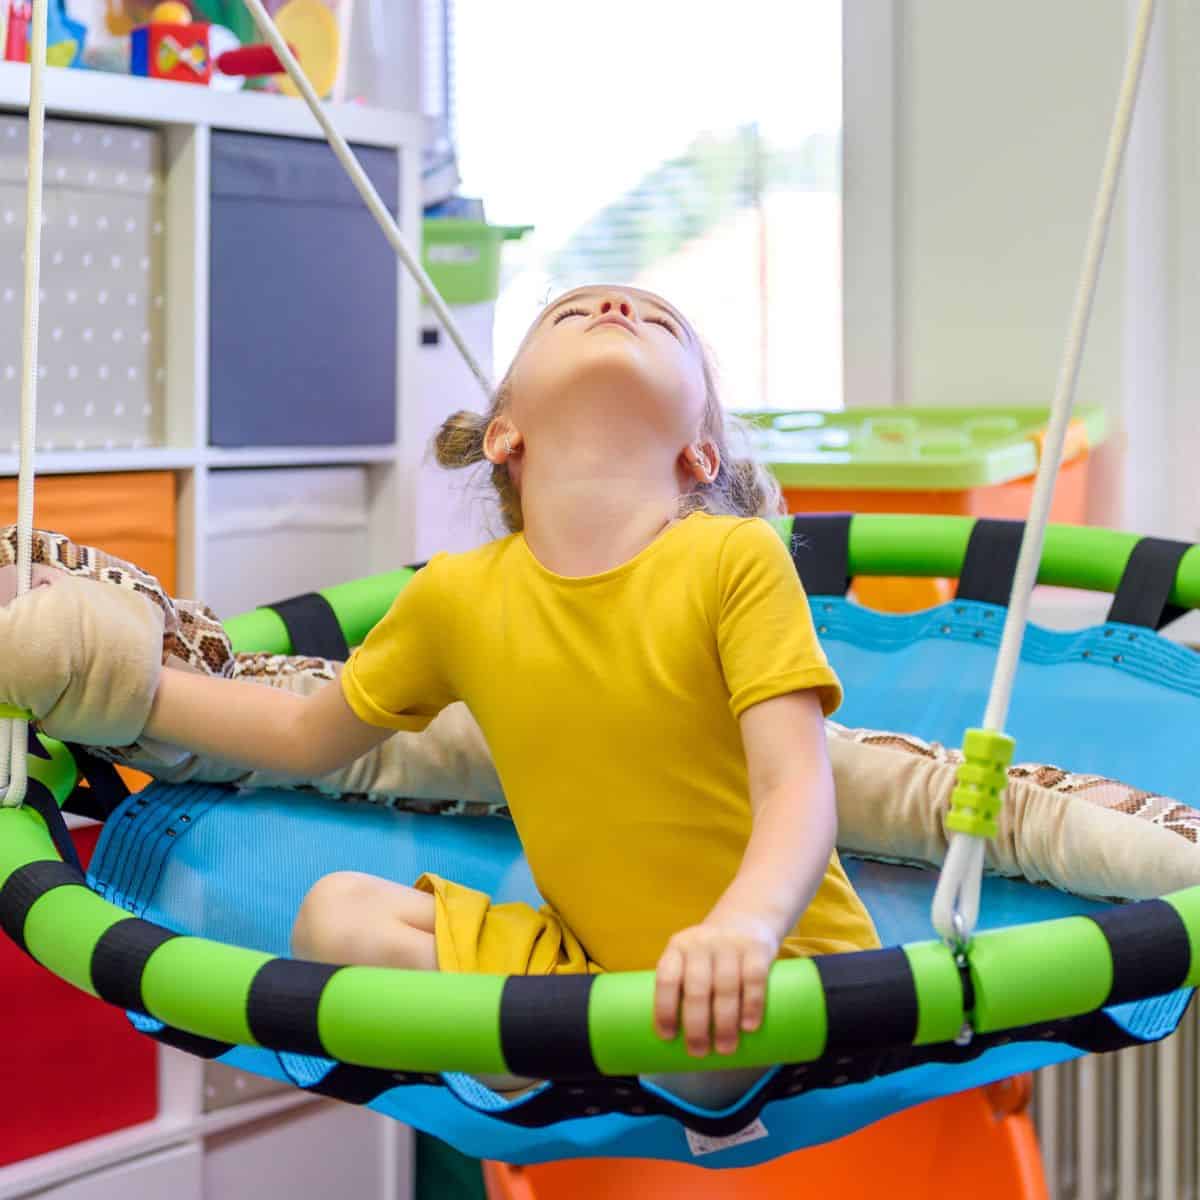 Occupational therapy for Autism is often recommended when a child is first diagnosed. Learn how OT can help your child with autism and what to expect!